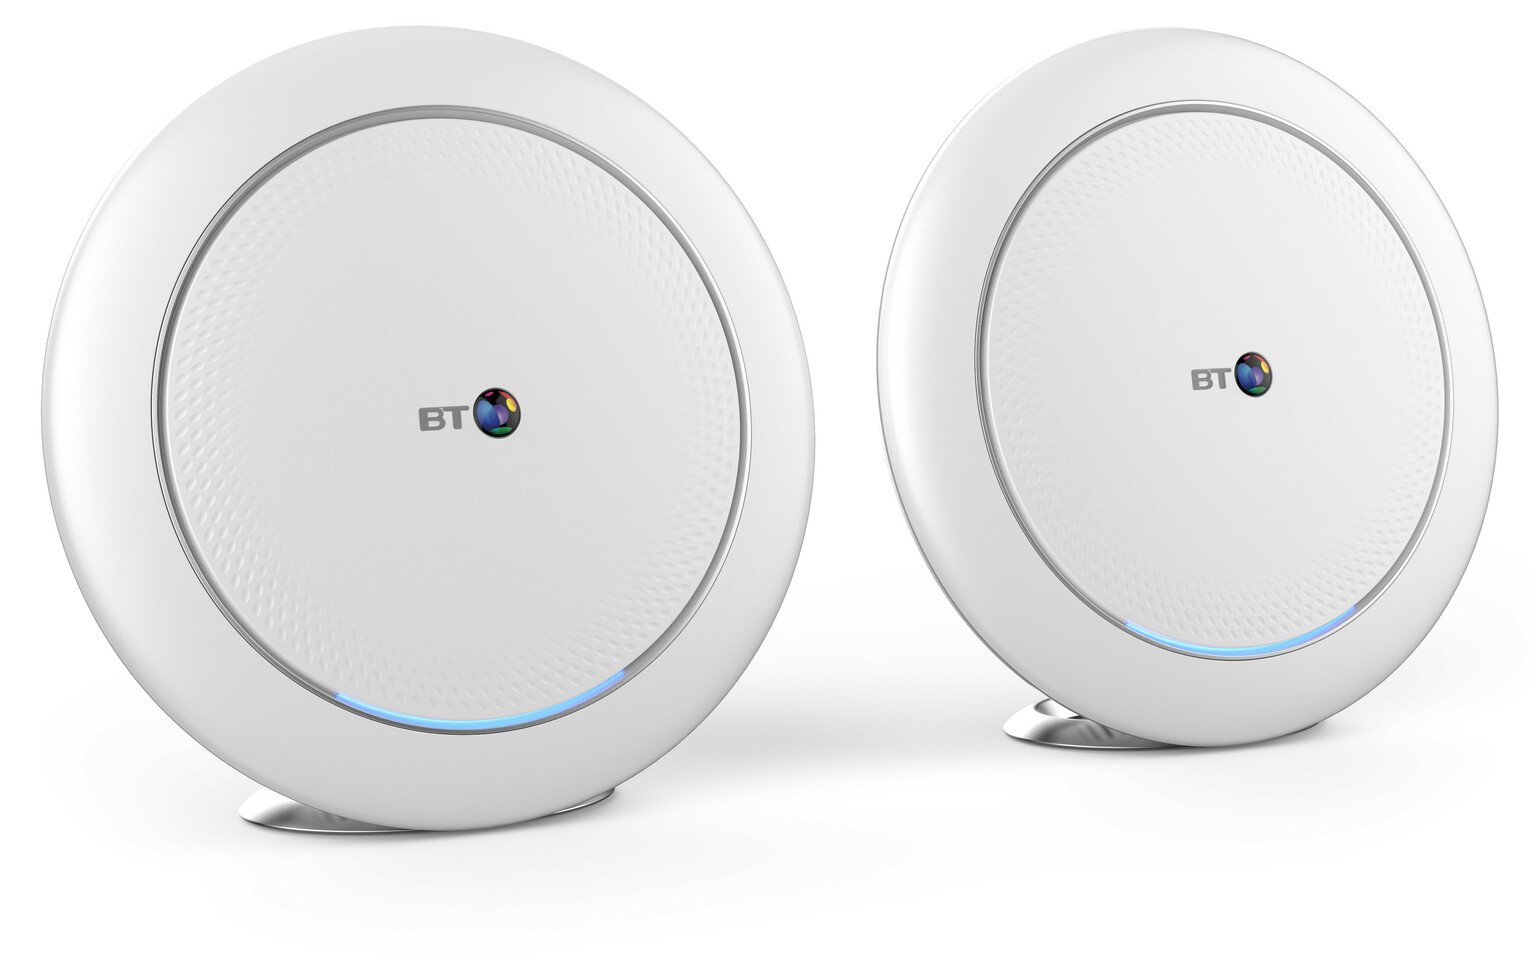 BT Premium AX3700 Whole Home Tri-Band Wi-Fi Twin Pack Review